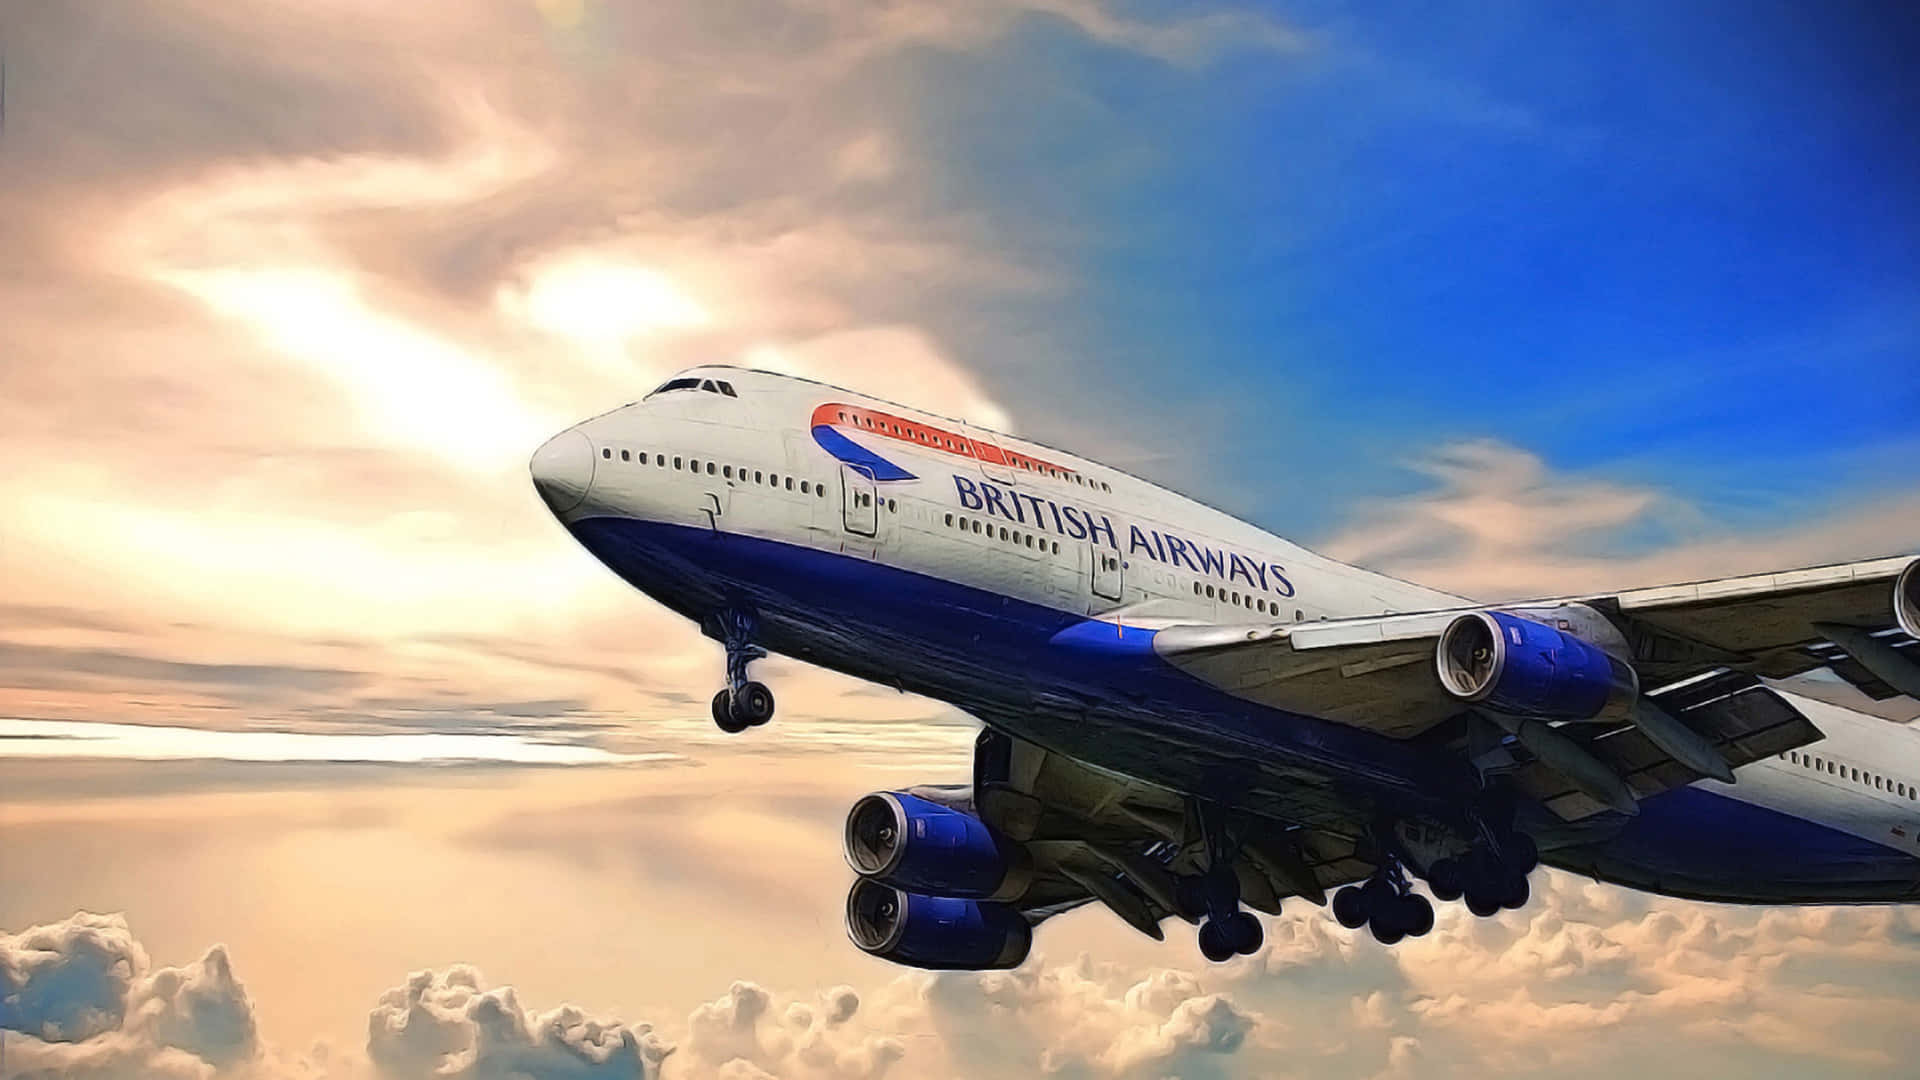 Image Majestic Boeing 747 Airplane In The Sky Background